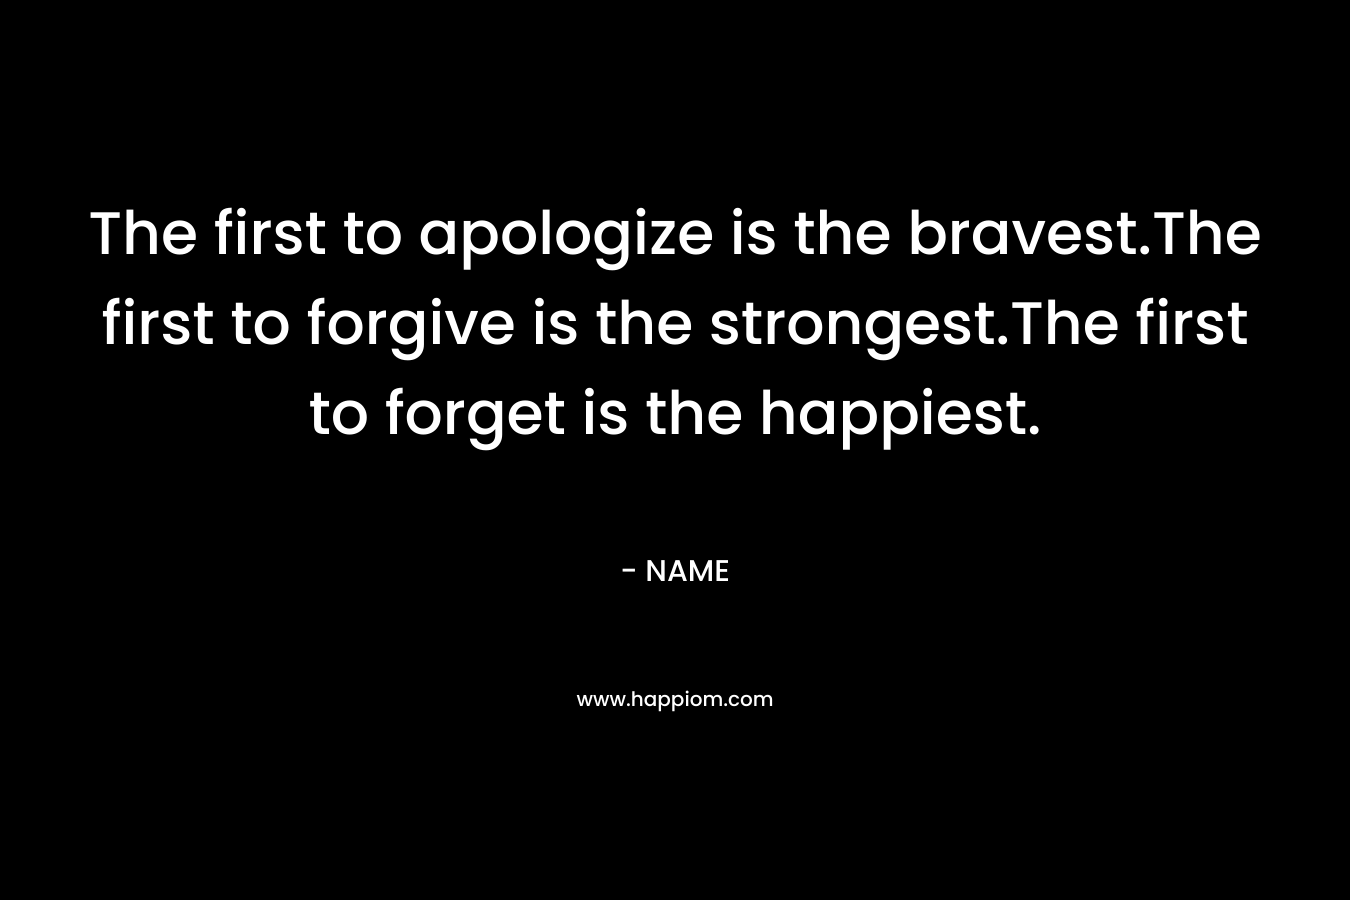 The first to apologize is the bravest.The first to forgive is the strongest.The first to forget is the happiest.